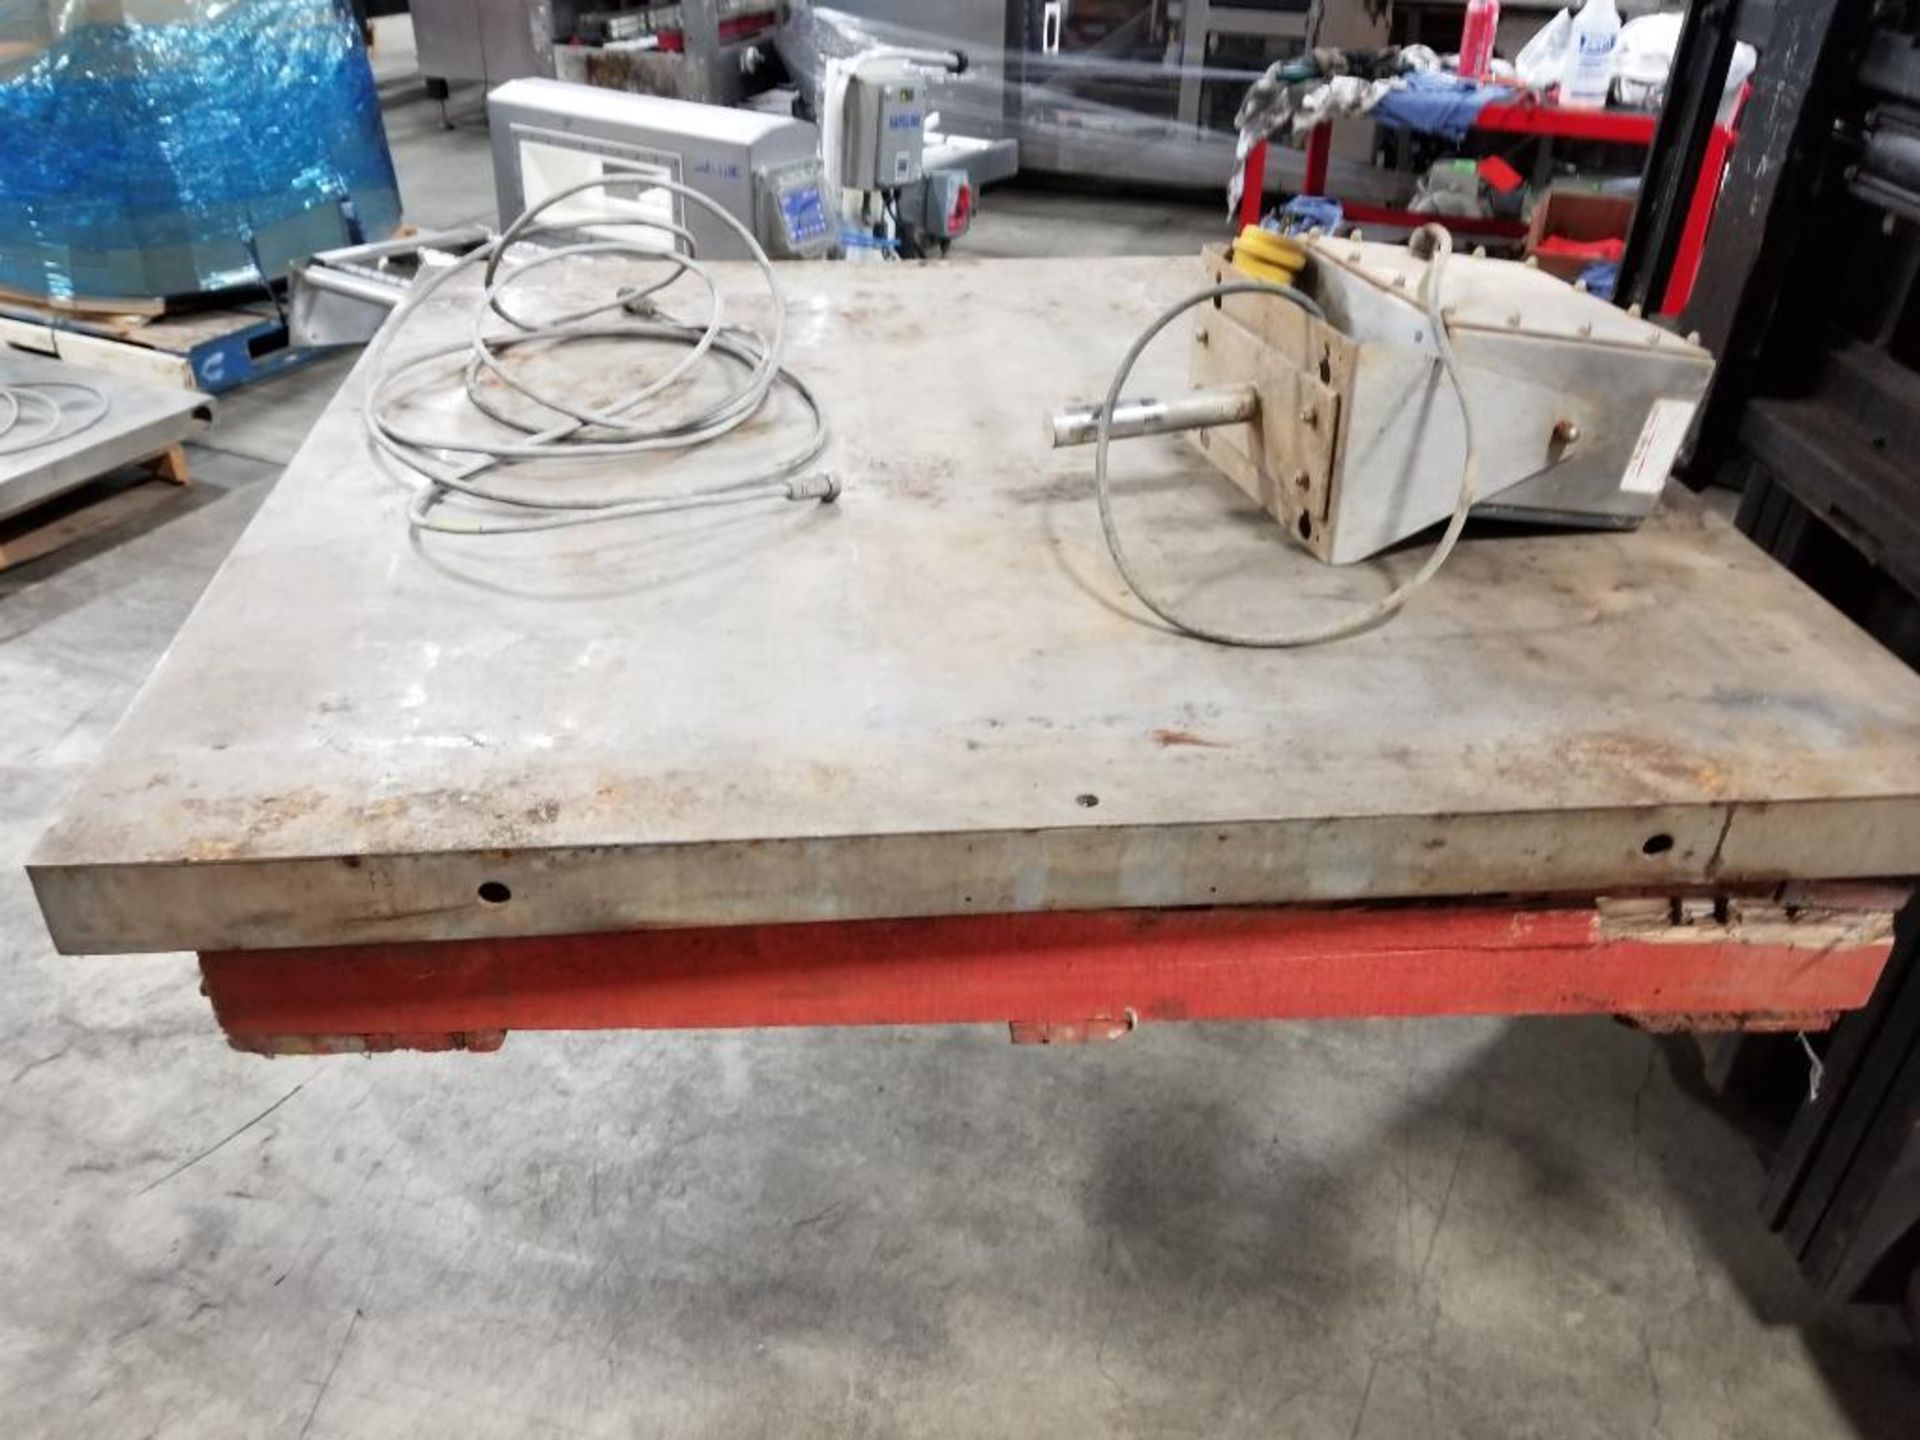 5000lb Weightronix platform scale. 48" x 48". 115v single phase. Tested and functional as pictured. - Image 7 of 11